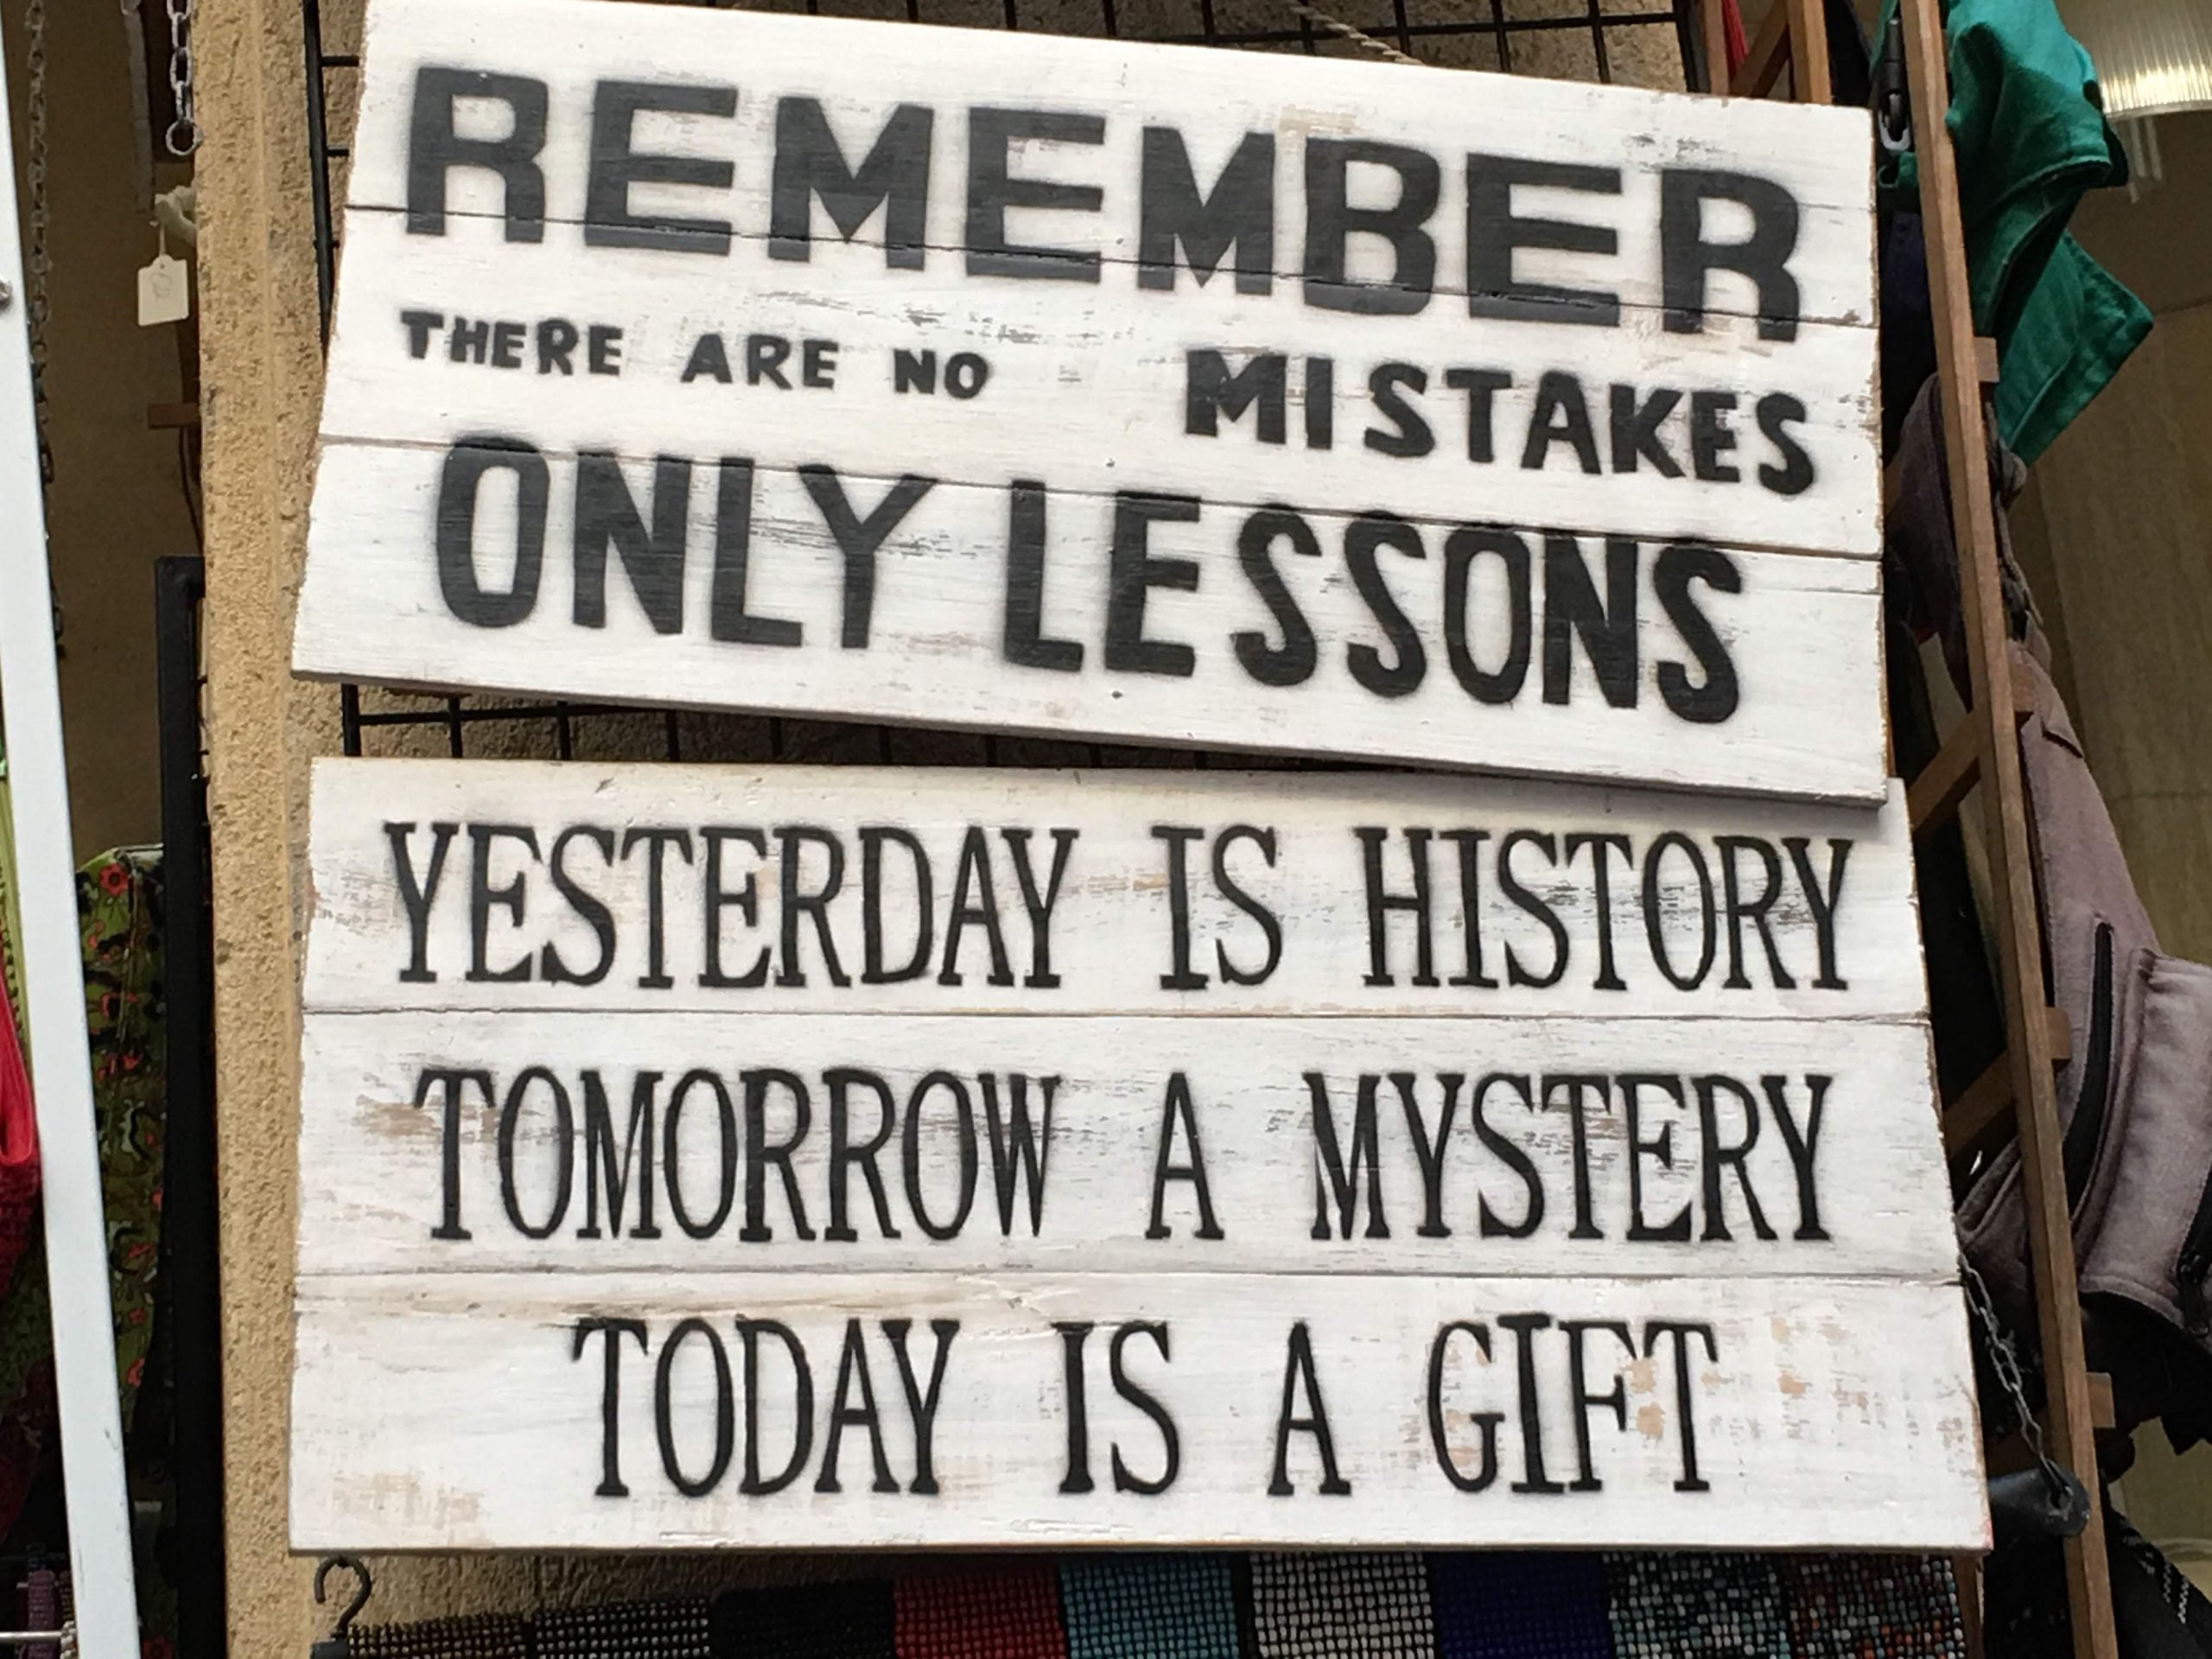 Remember, there are no mistakes, only lessons.